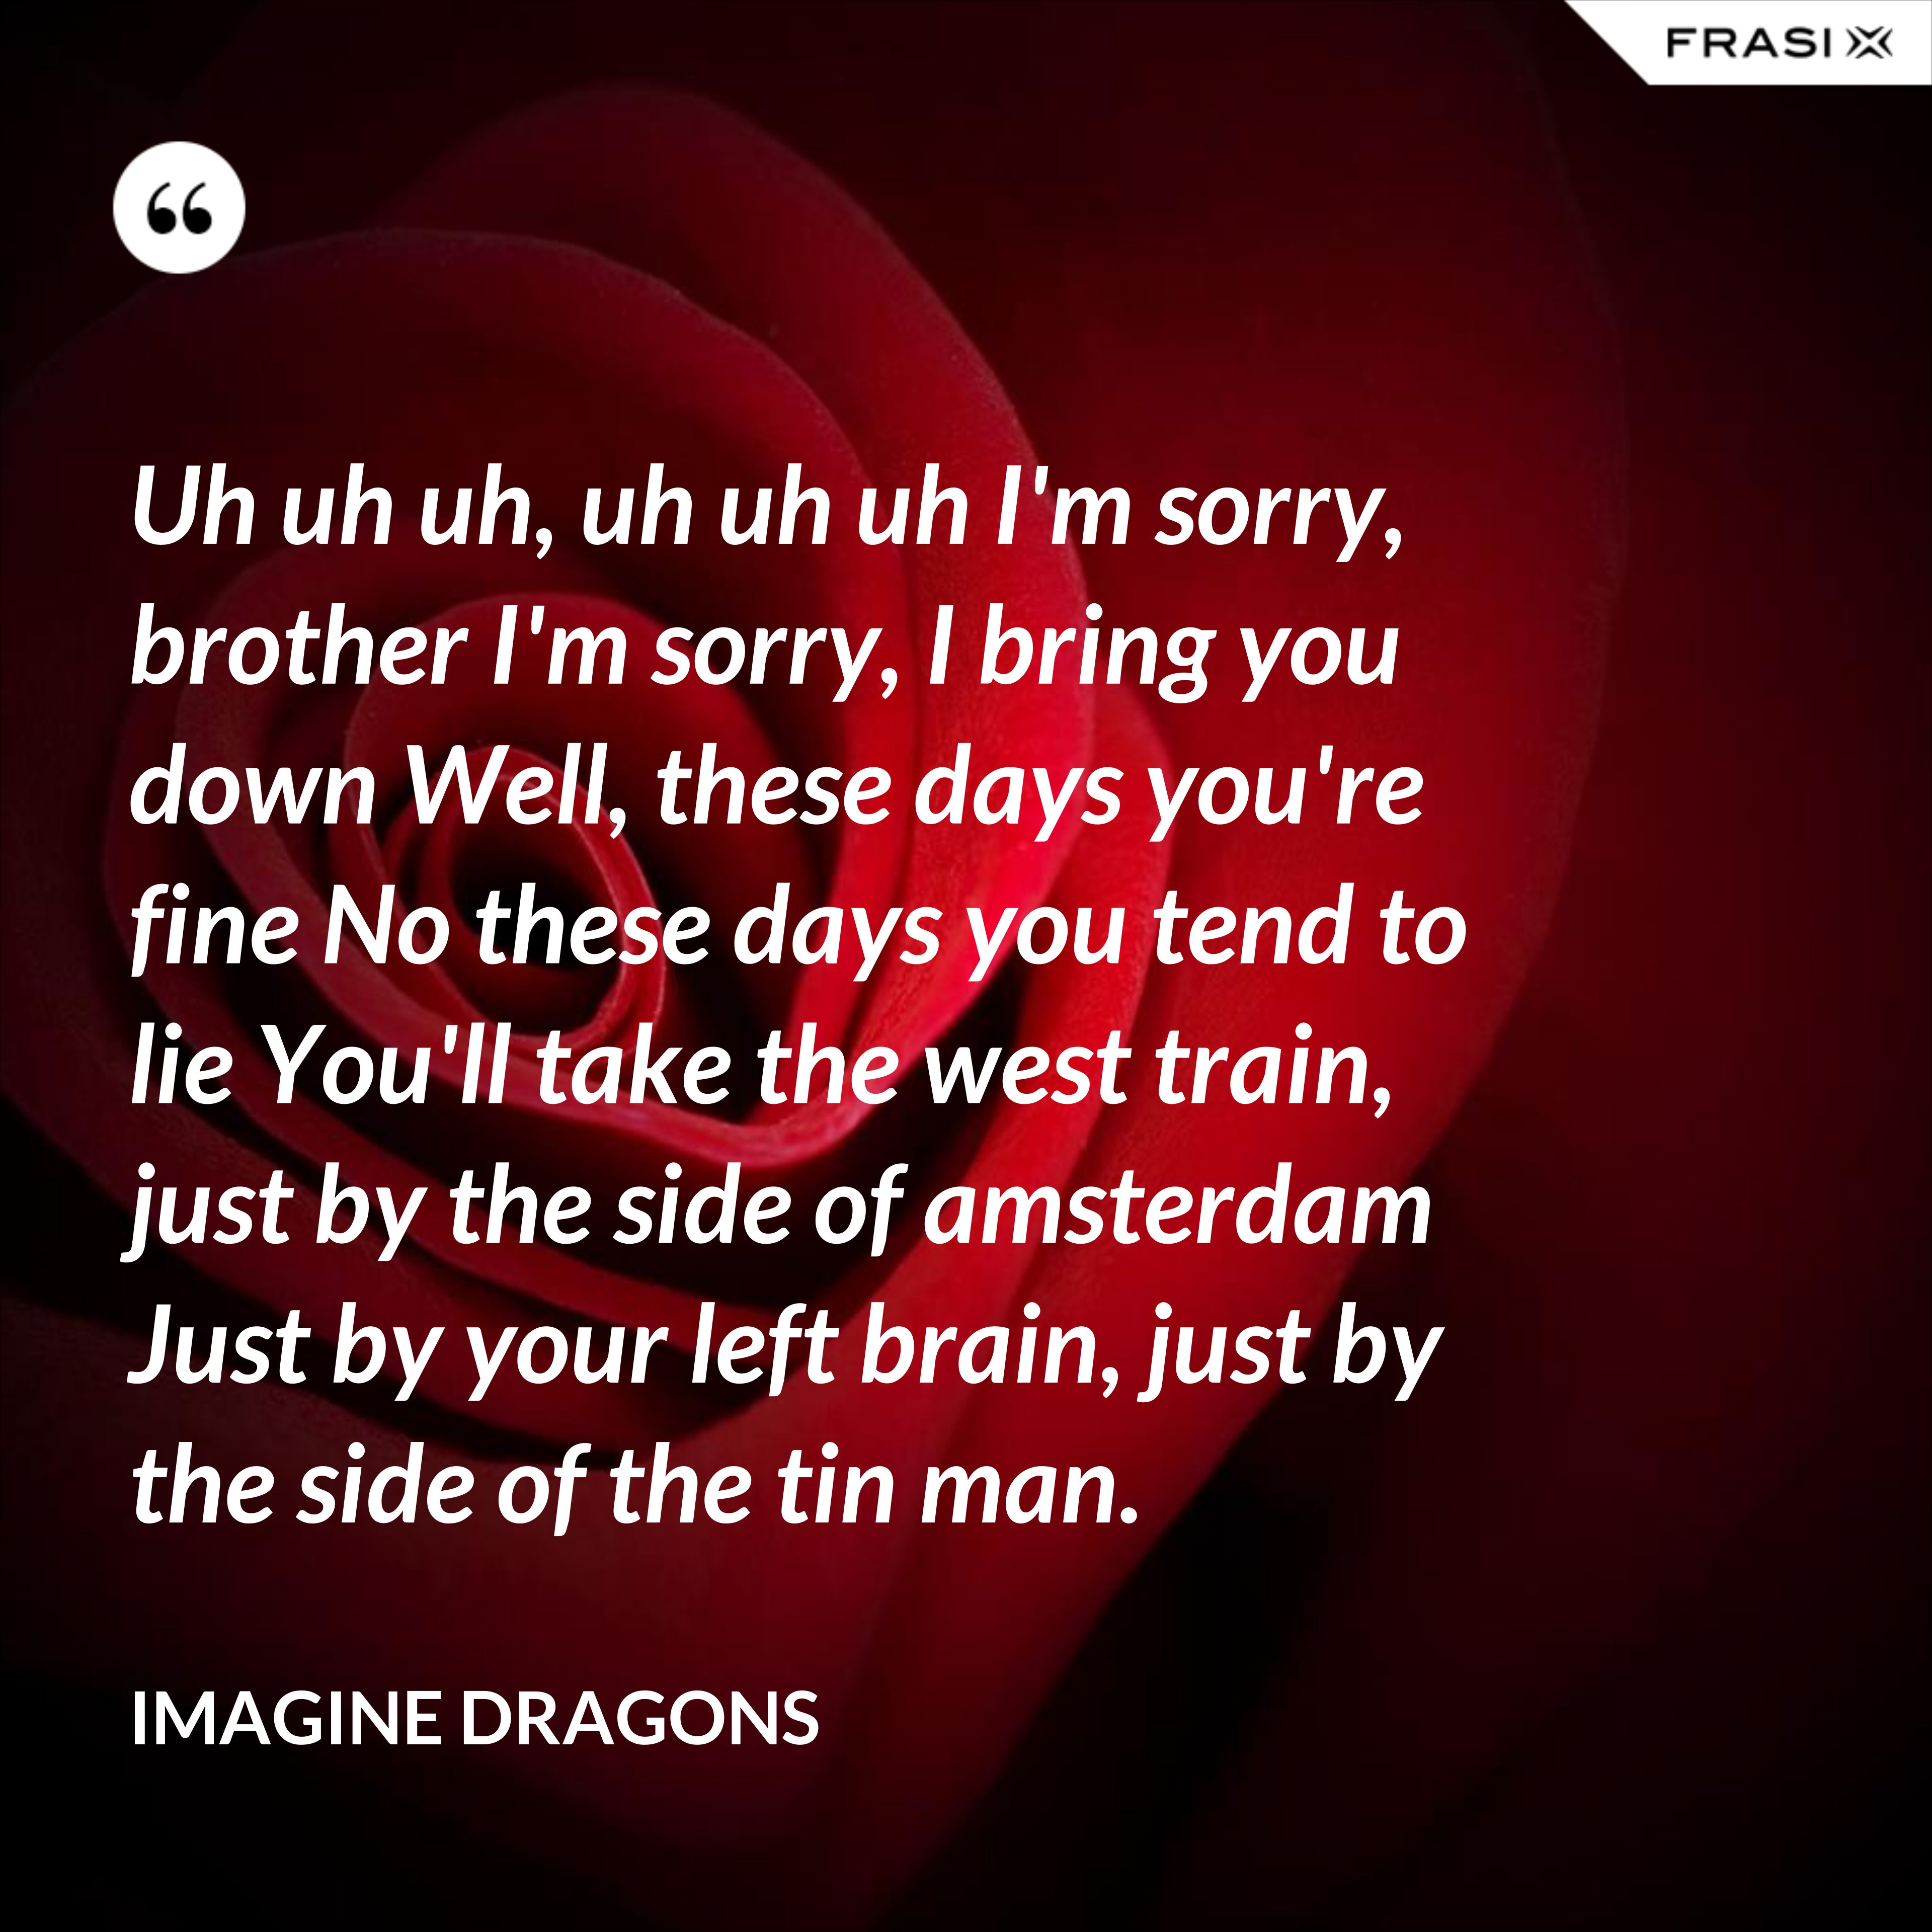 Uh uh uh, uh uh uh I'm sorry, brother I'm sorry, I bring you down Well, these days you're fine No these days you tend to lie You'll take the west train, just by the side of amsterdam Just by your left brain, just by the side of the tin man. - Imagine Dragons